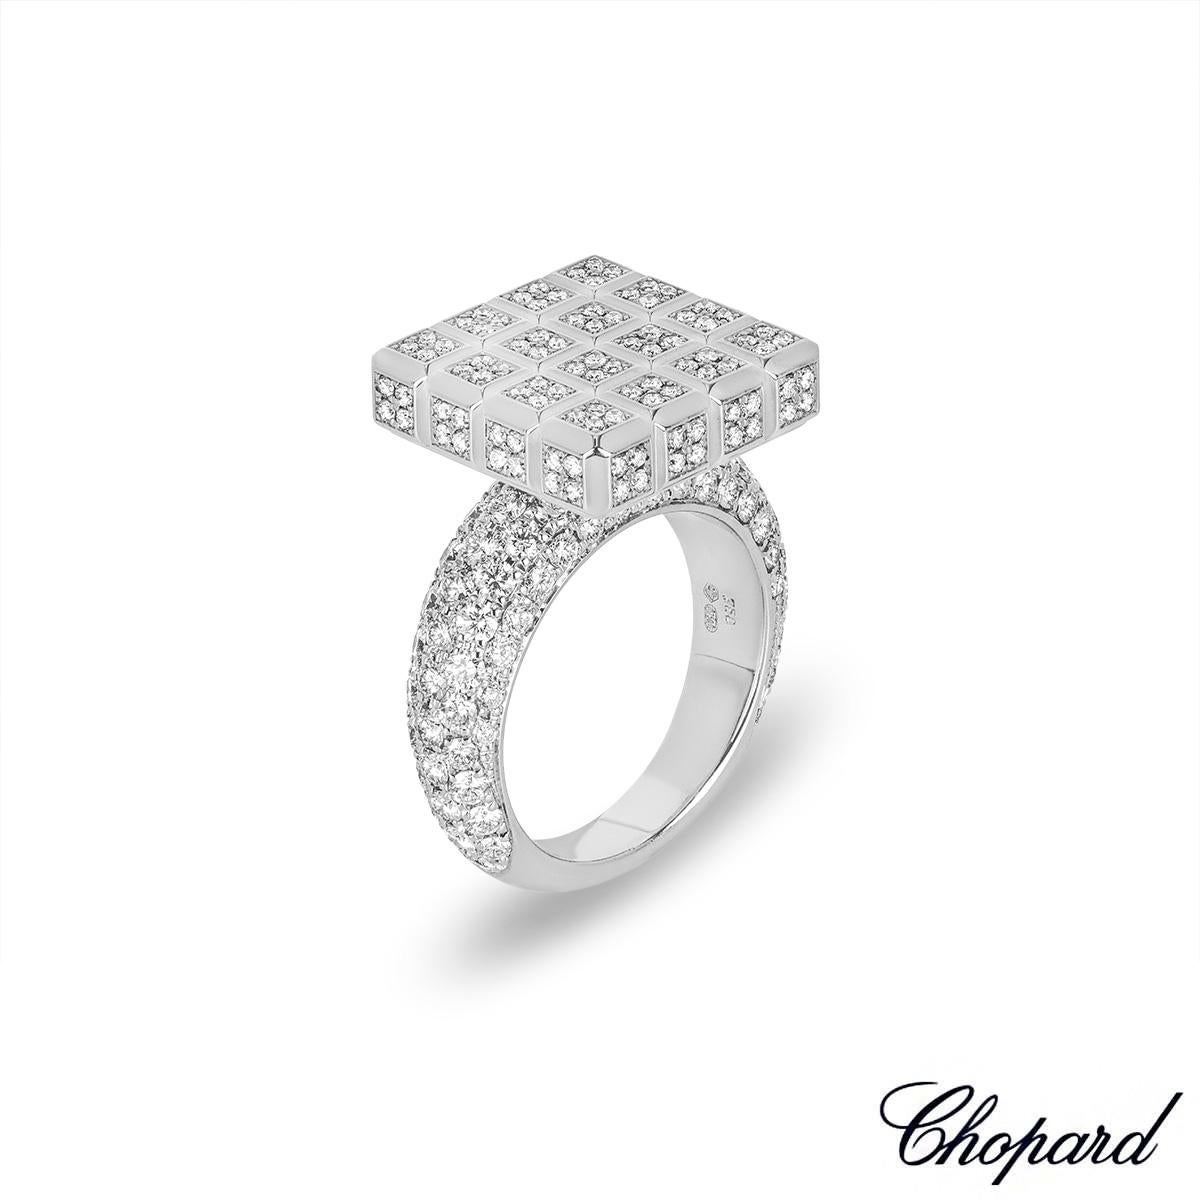 An exquisite 18k white gold diamond set ring from the Chopard Ice Cube collection. The ring is composed of 1.5cm X 1.5cm iconic square ice cube motif, fully pave set with round brilliant cut diamonds, set to a 4mm half eternity pave set diamond